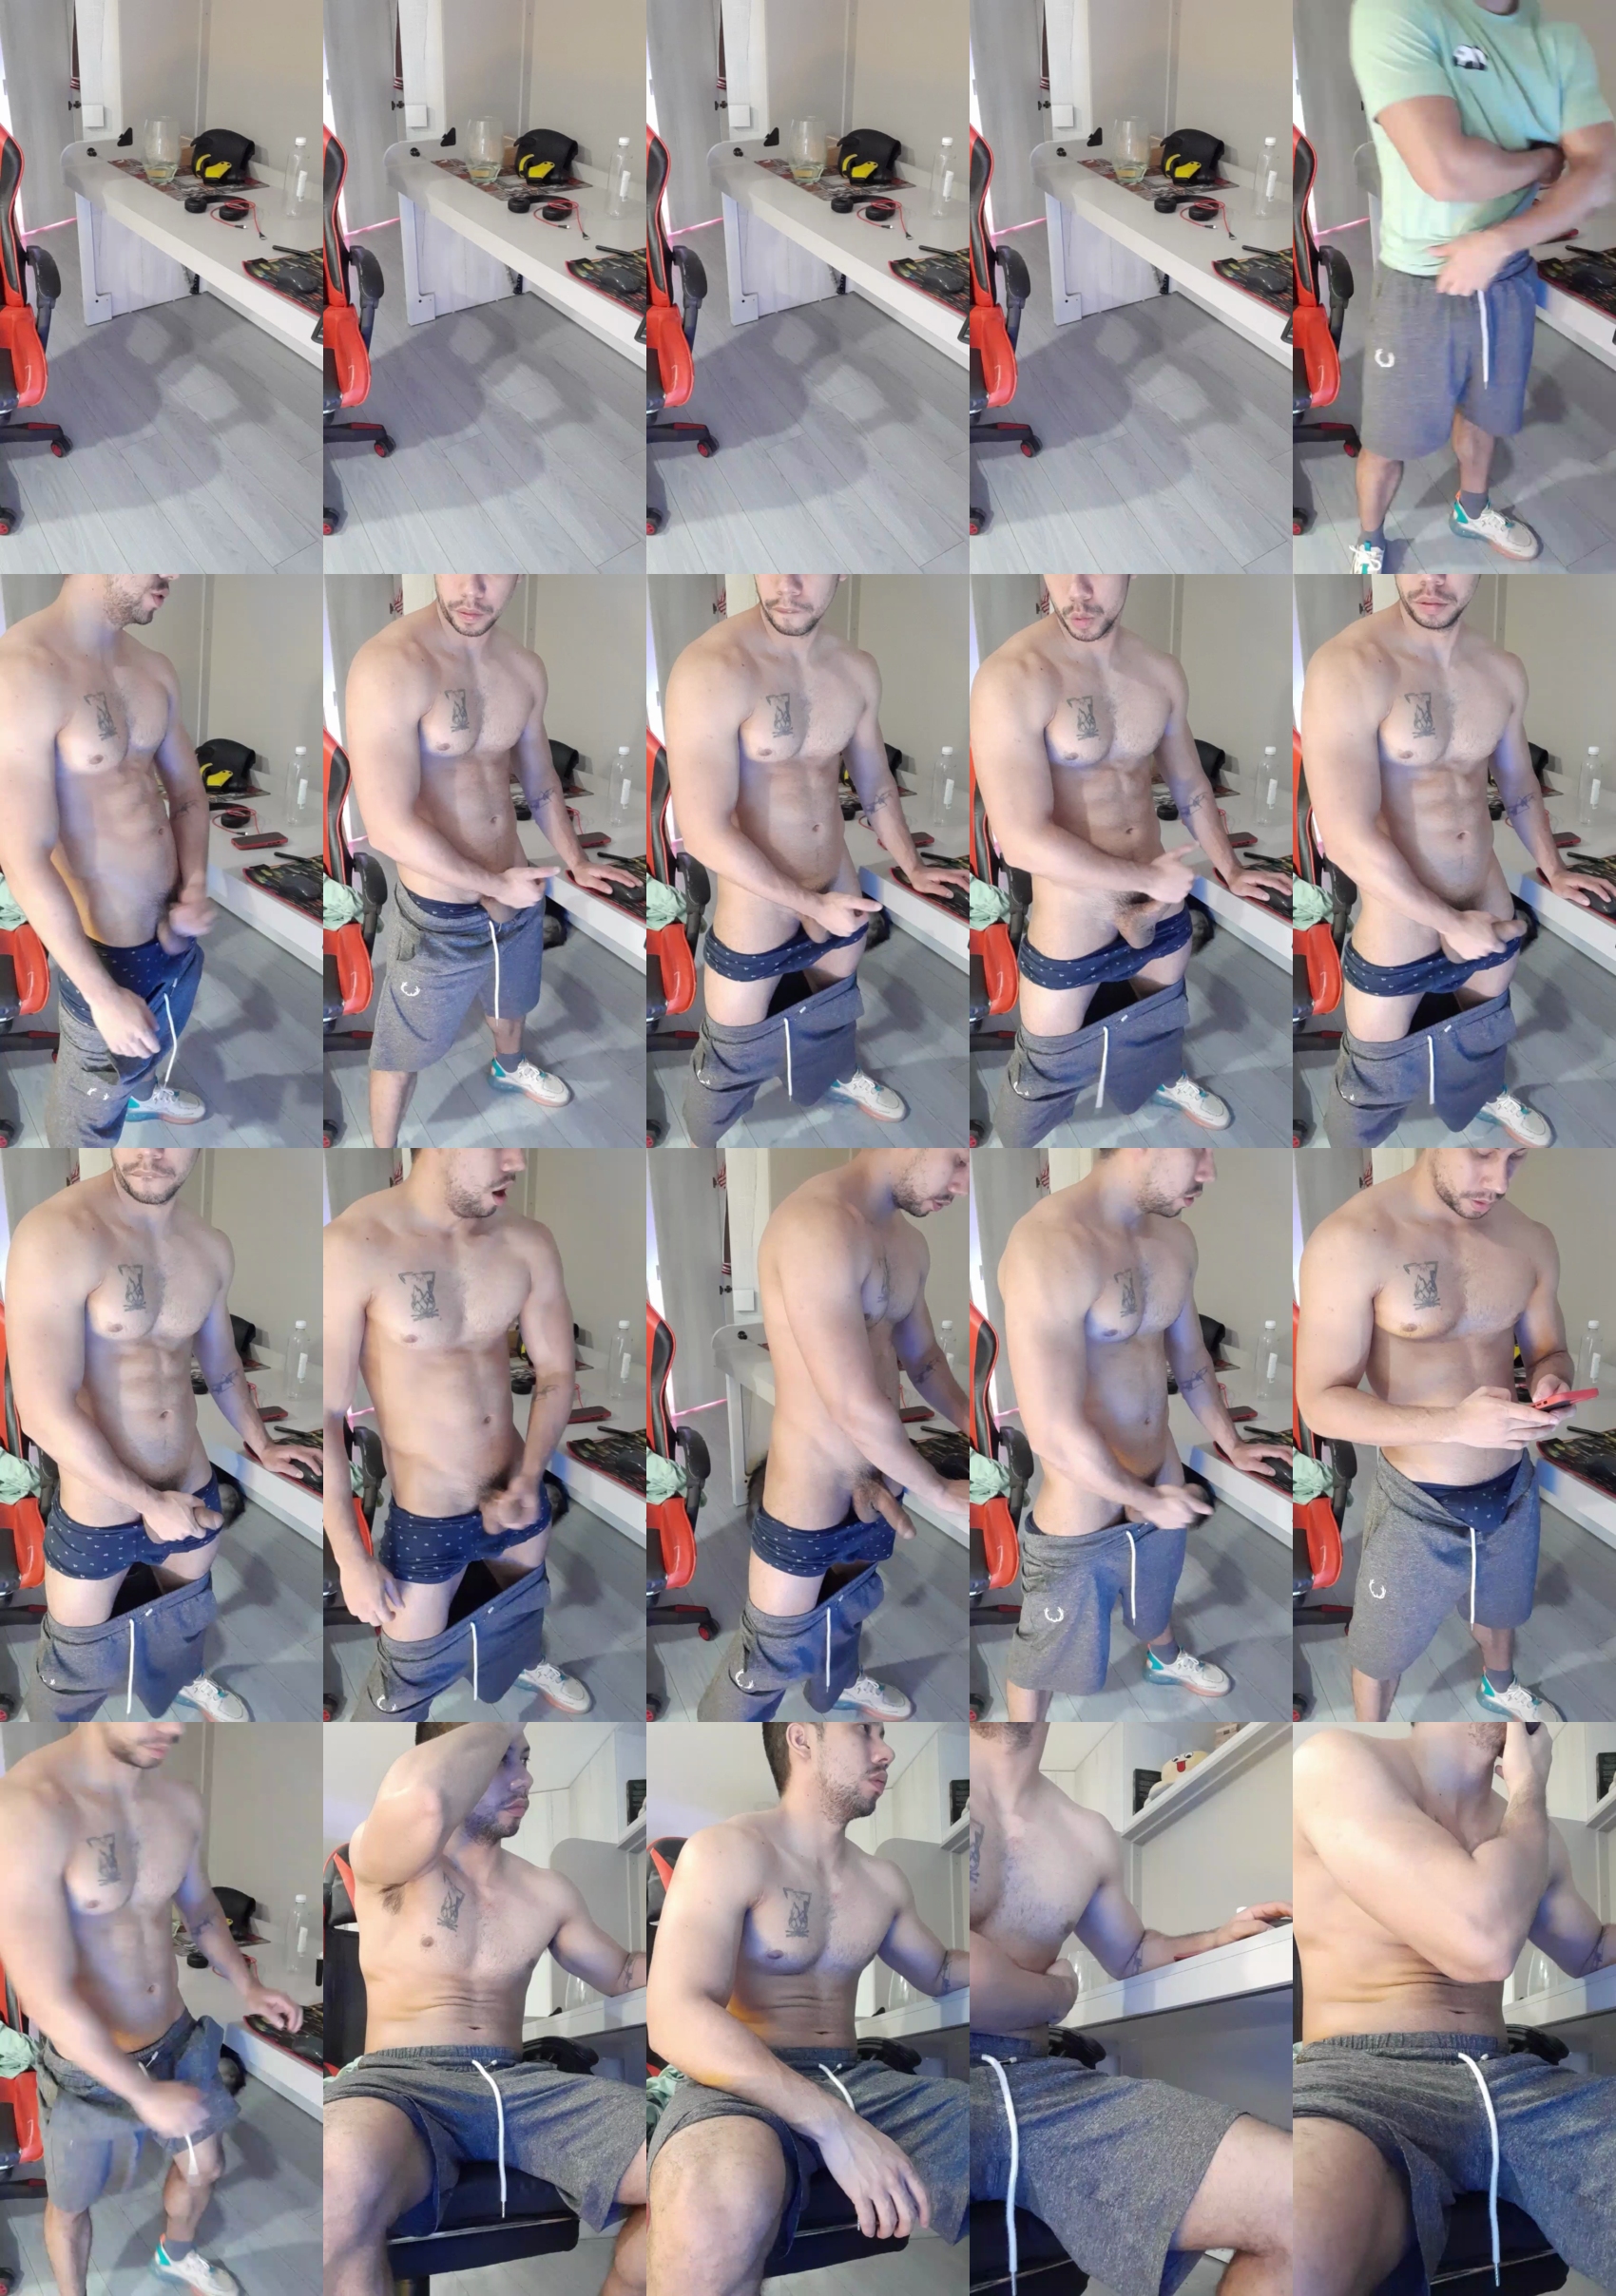 A_david  06-12-2022 Recorded Video naked